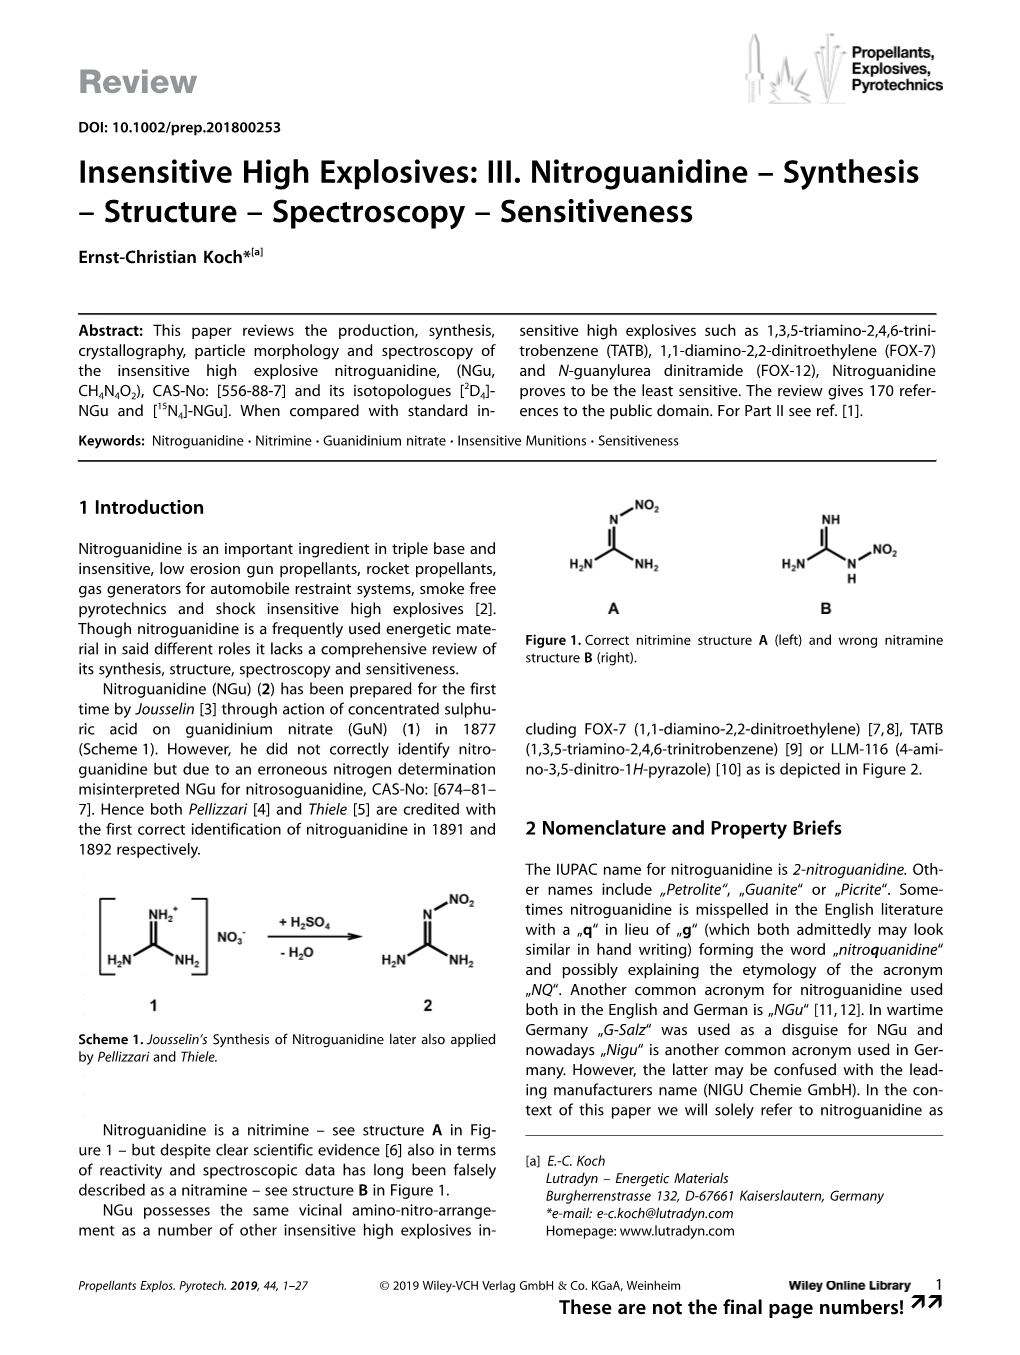 Insensitive High Explosives: III. Nitroguanidine – Synthesis